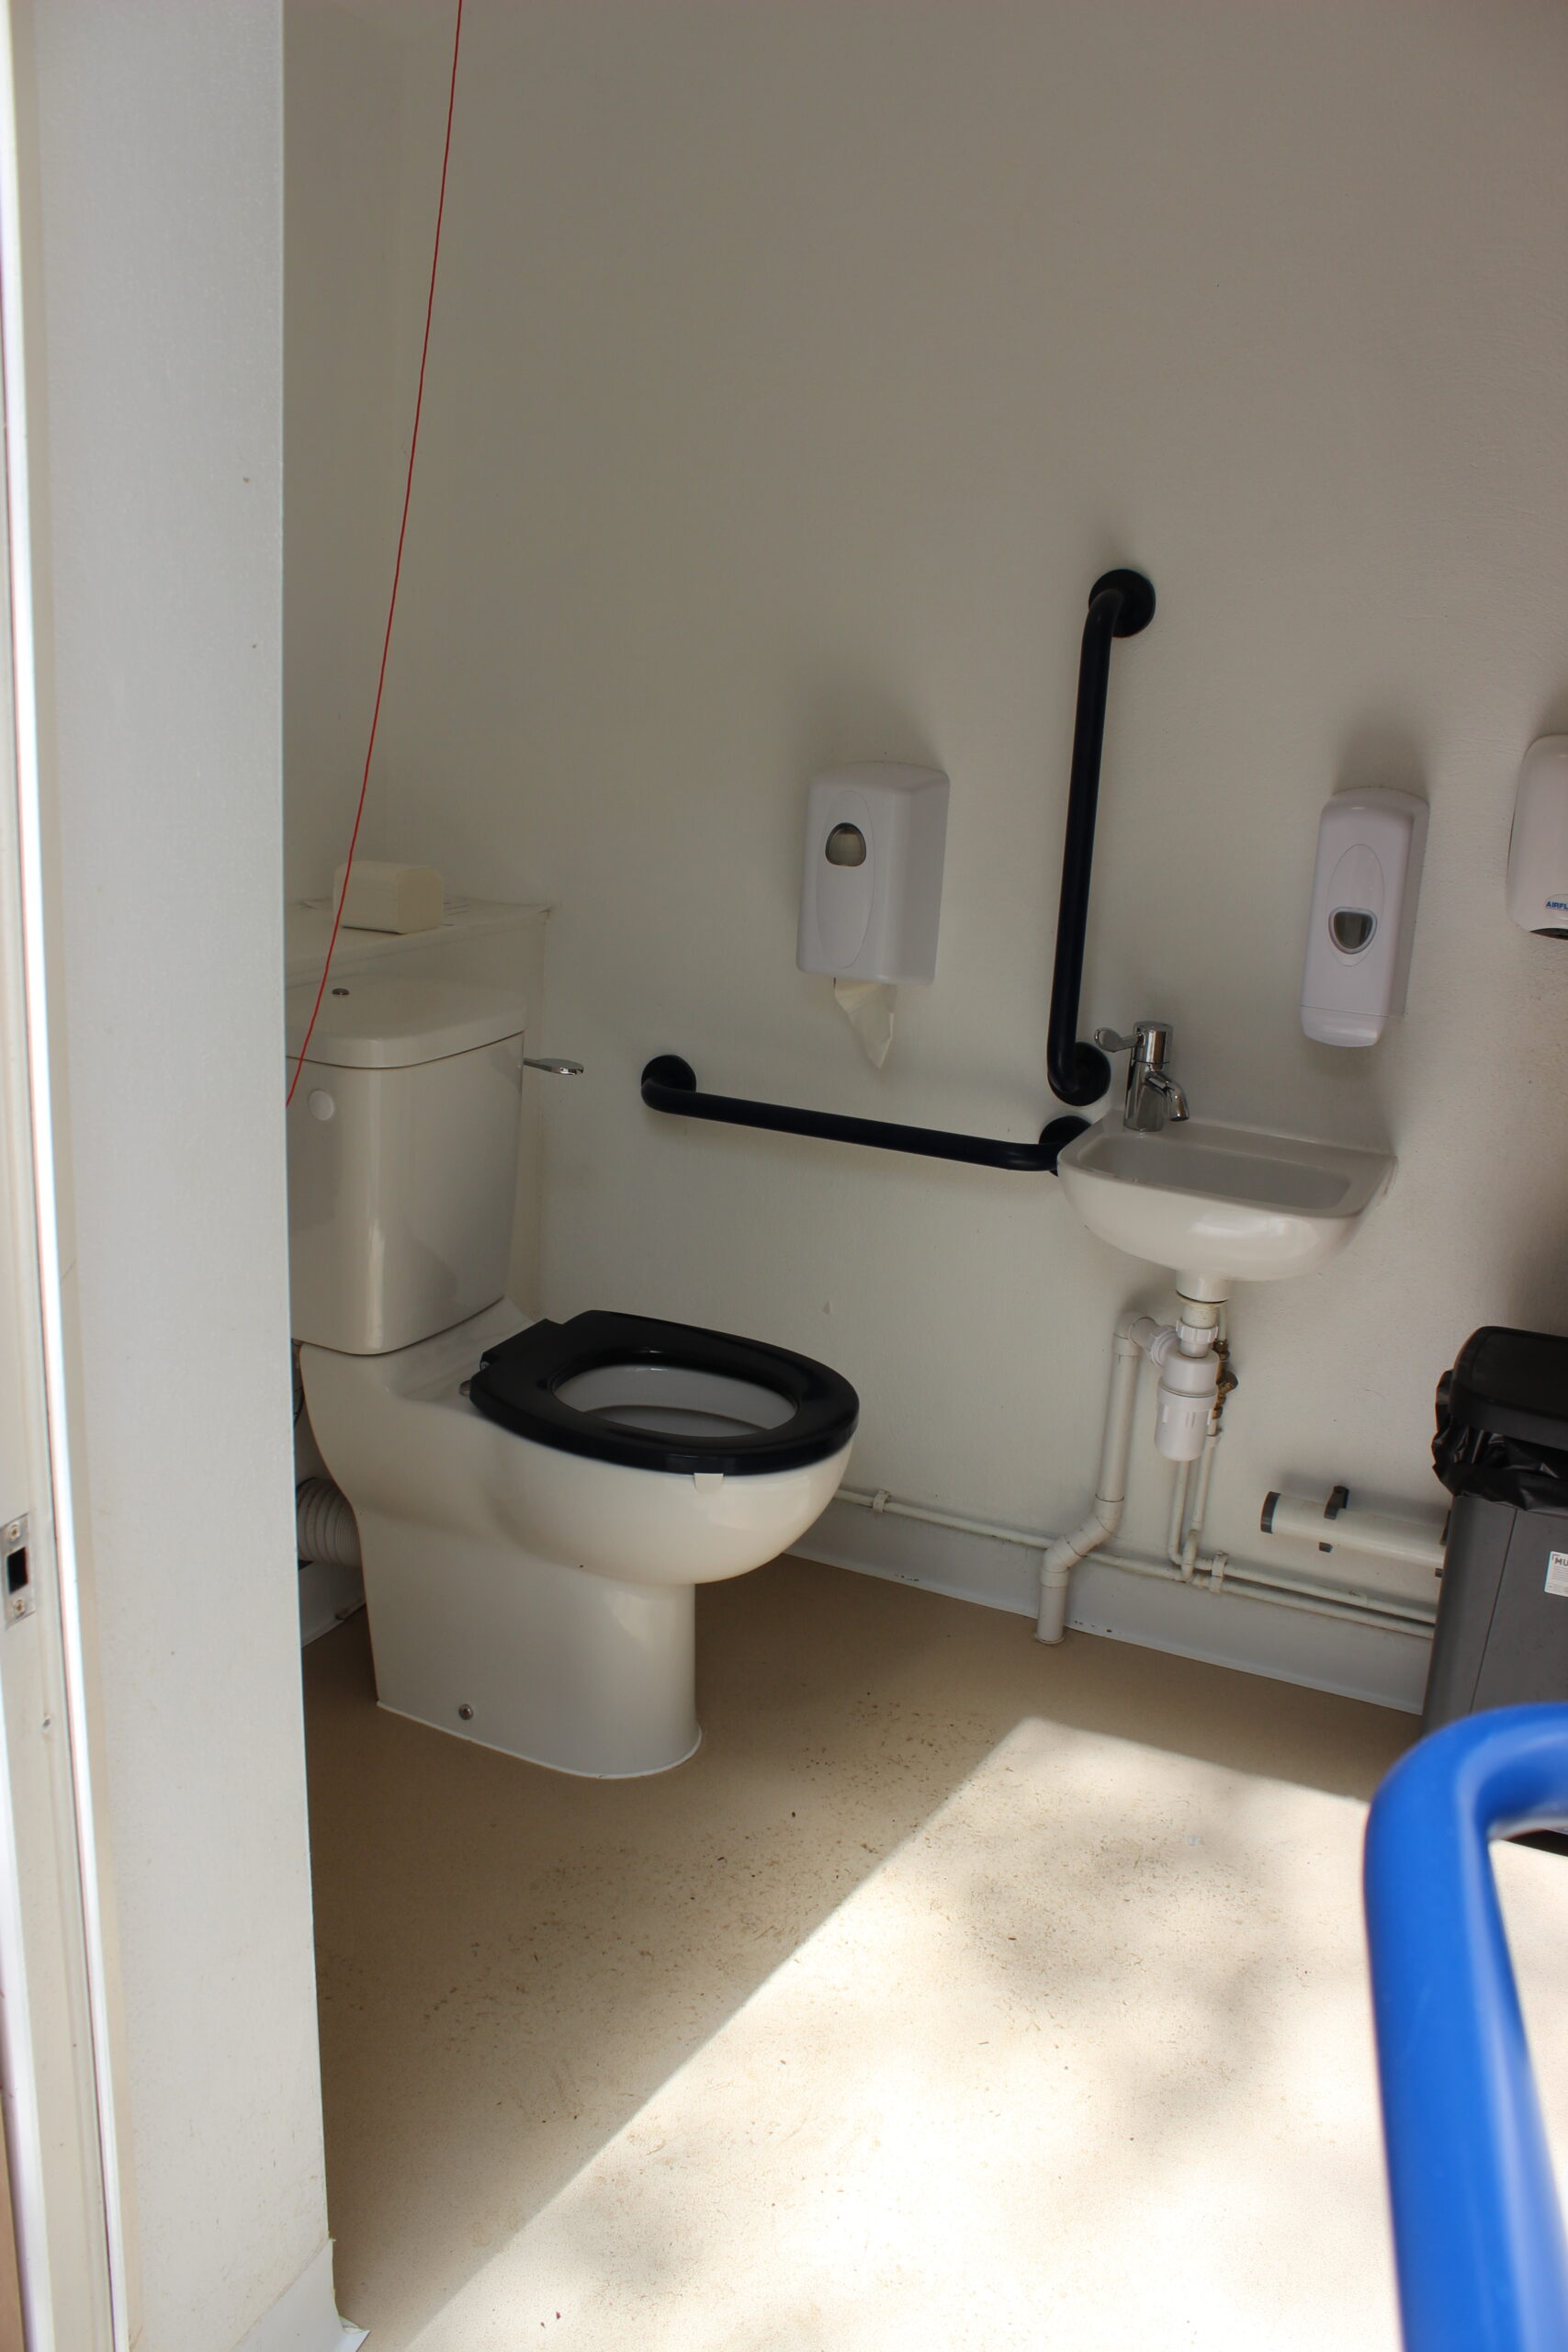 The accessible toilet at Enys House and Gardens